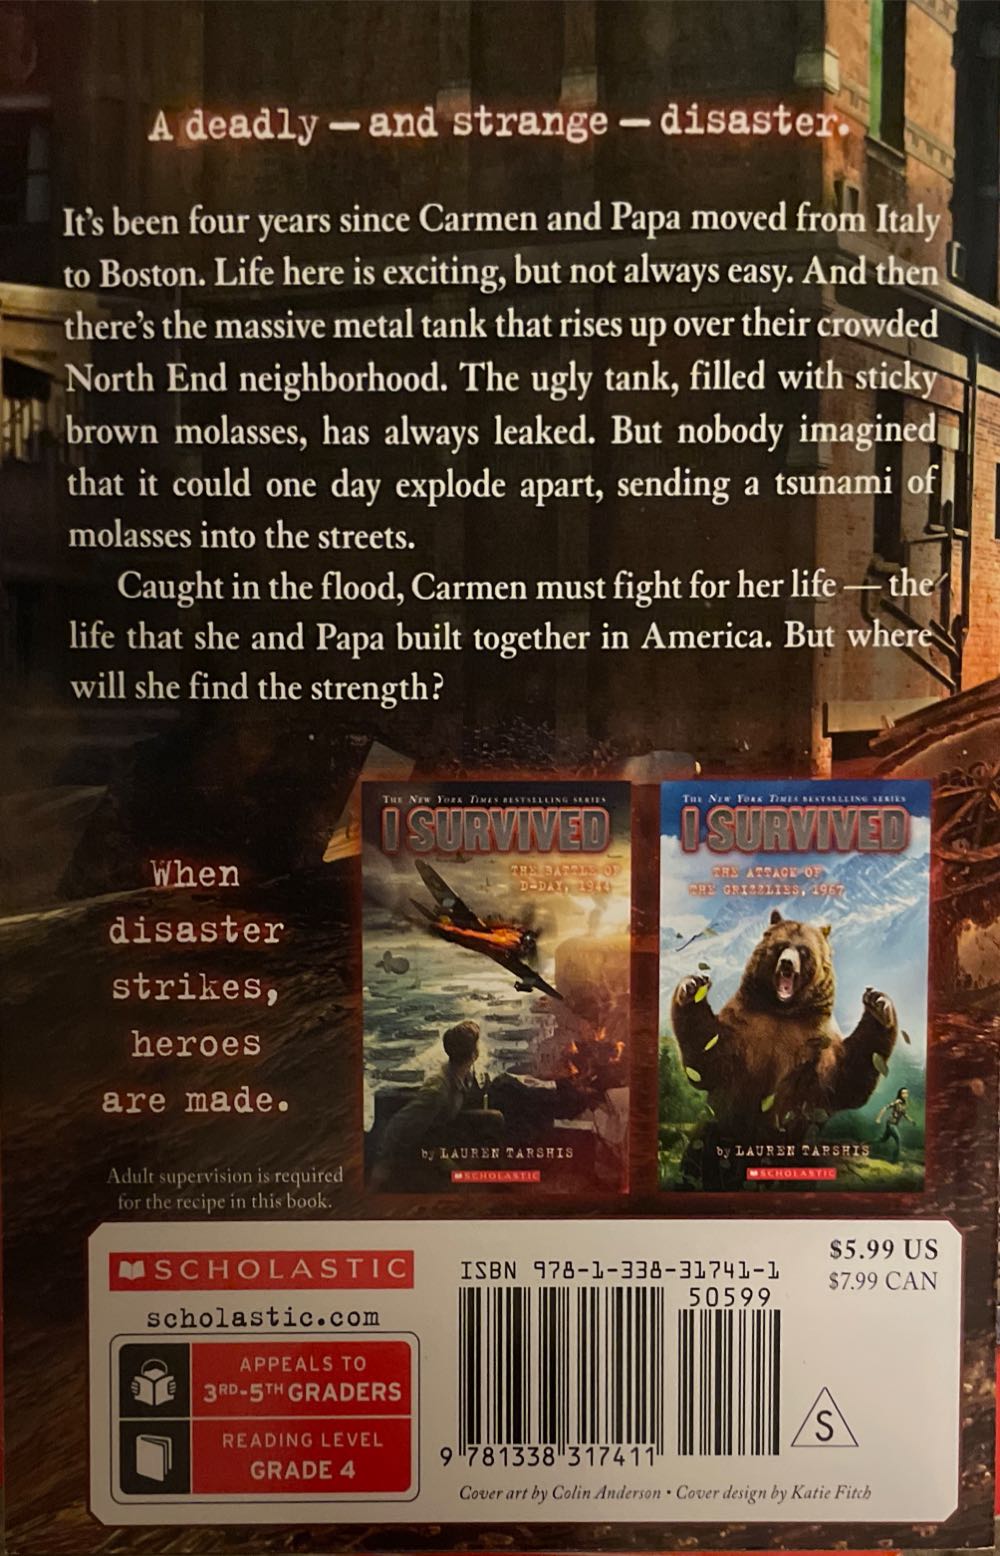 I Survived: The Great Molasses Flood, 1919 - Lauren Tarshis (Scholastic Paperbacks - Paperback) book collectible [Barcode 9781338317411] - Main Image 2